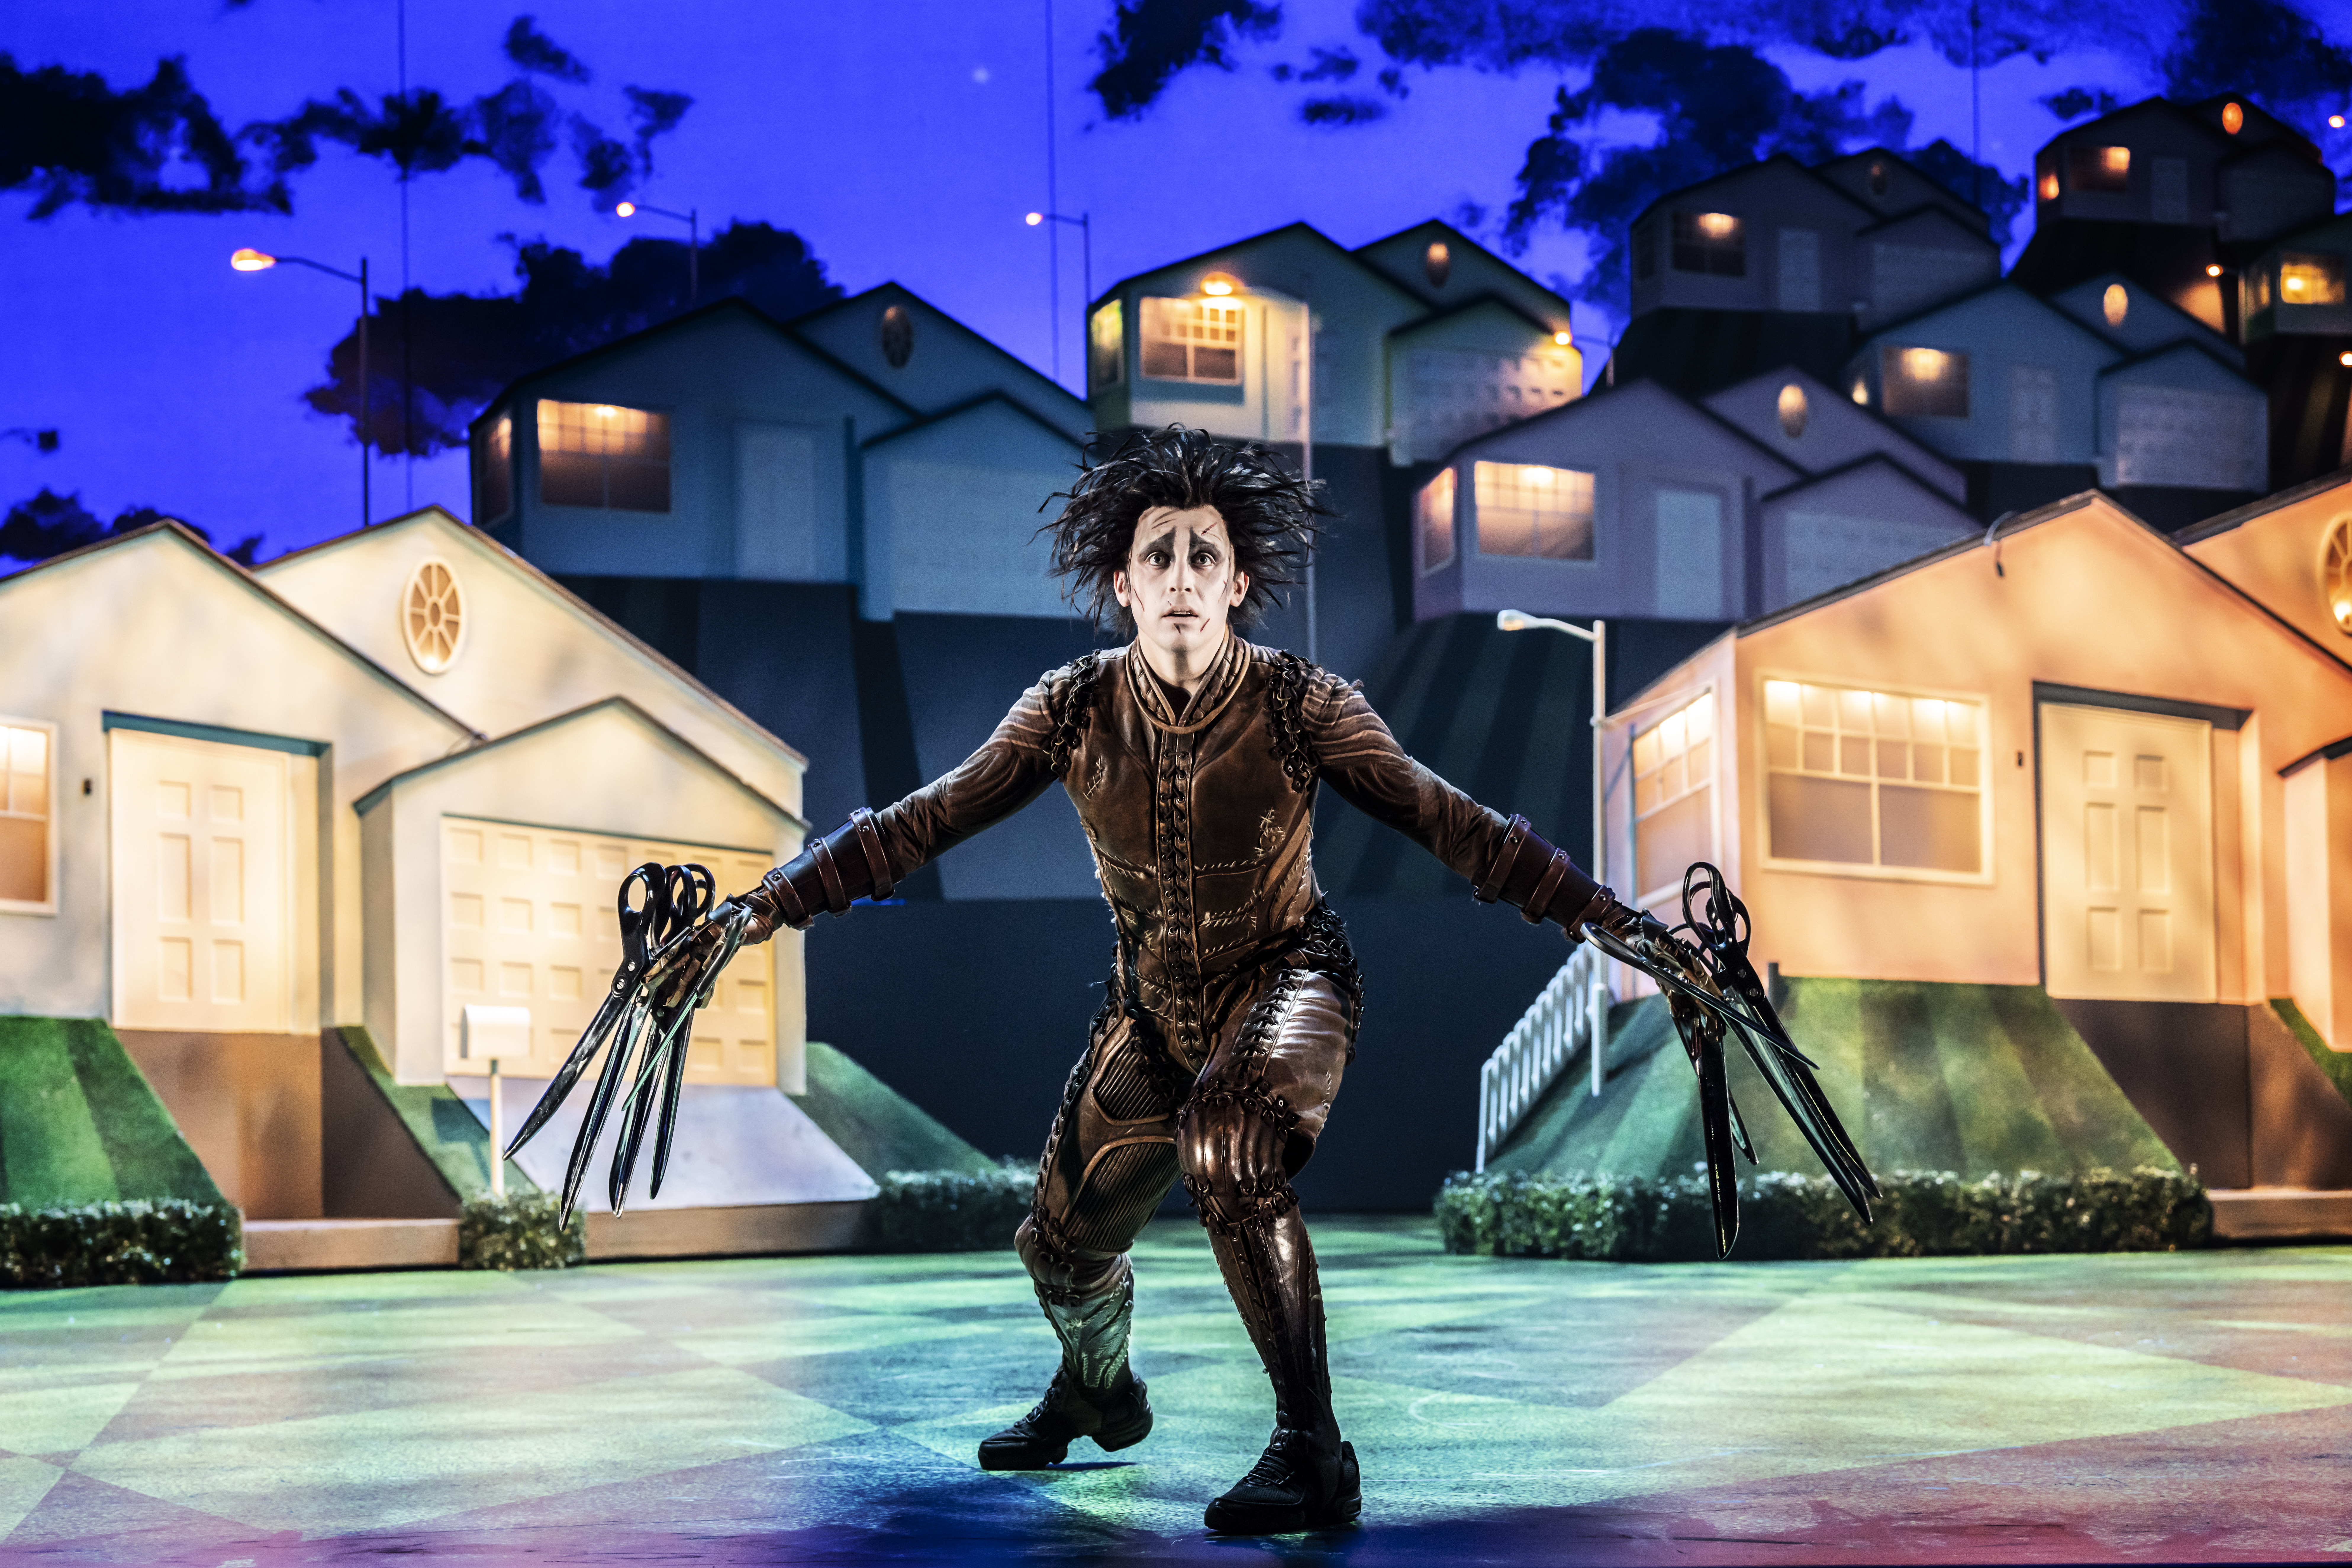 Capital Theatre’s Edward Scissorhands Tickets Competition